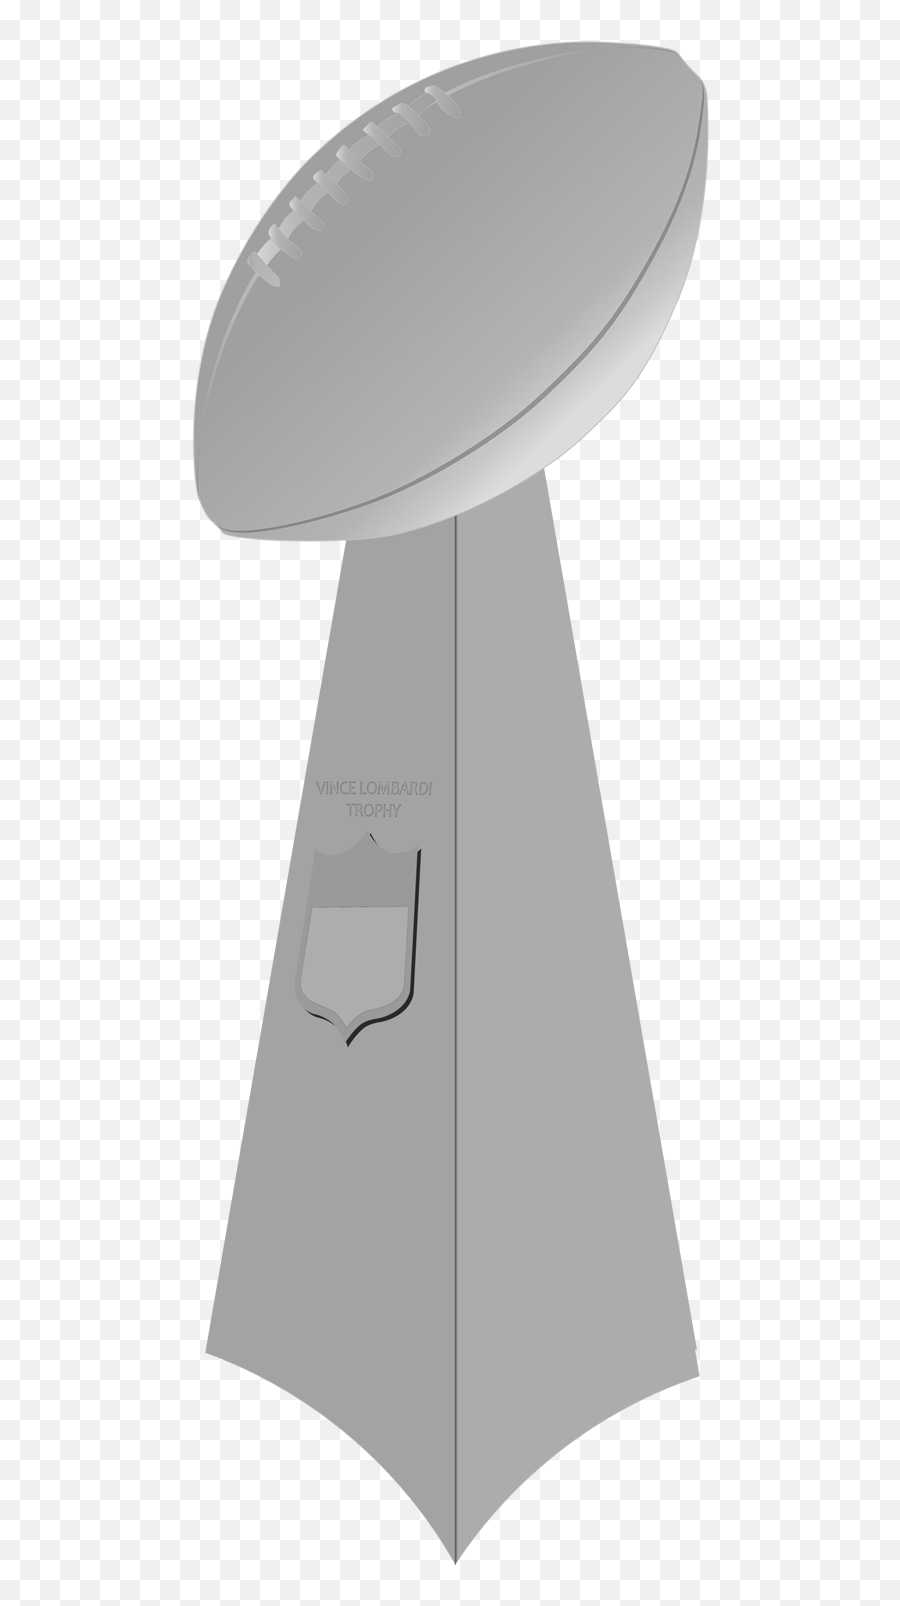 Vince Lombardi Trophy - Wikipedia Super Bowl Trophy Png Cartoon,World Cup Trophy Png